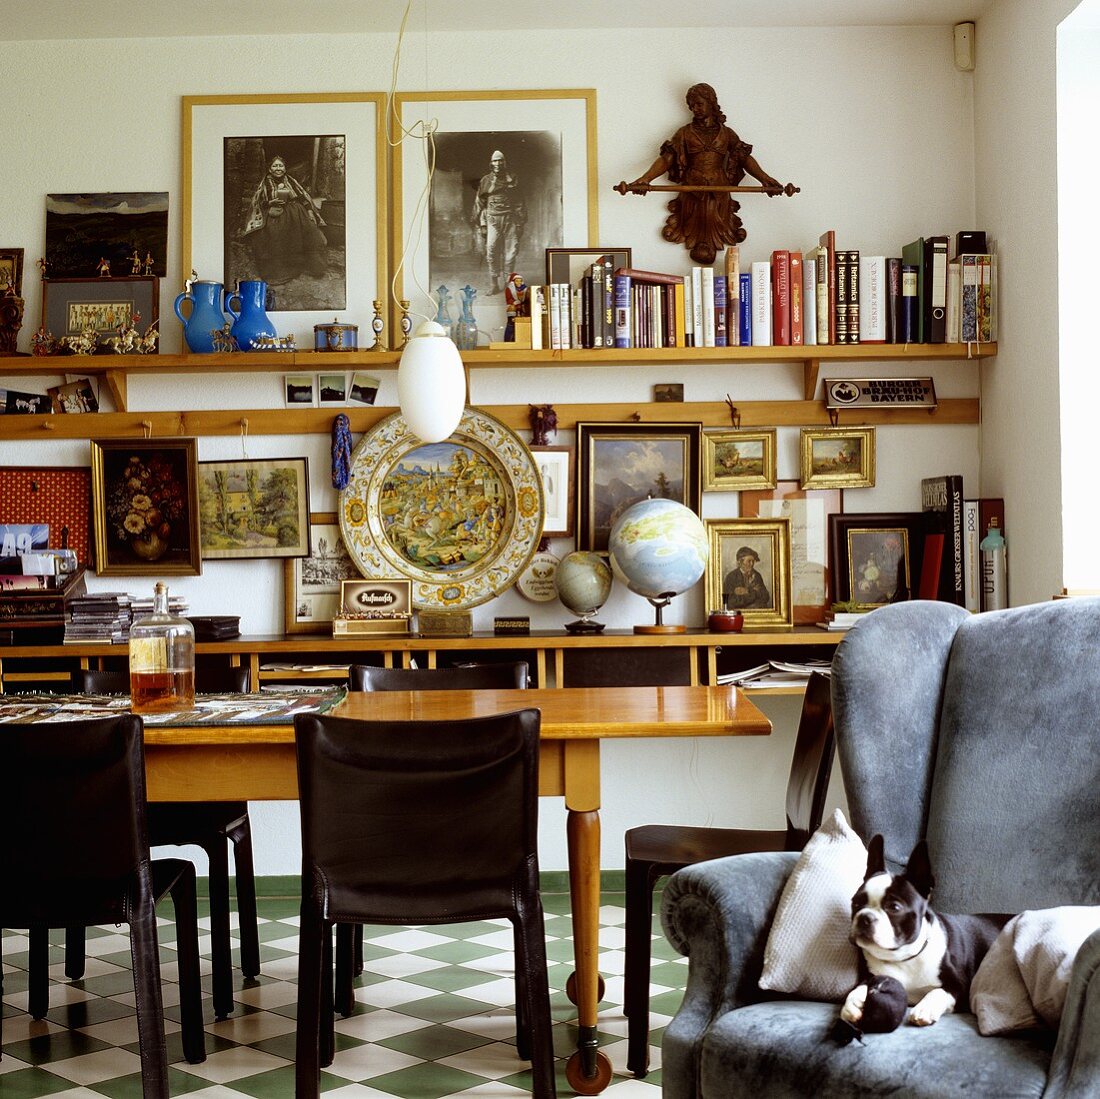 A dog lying in an armchair and a dining table in a living room in front of a wall shelf